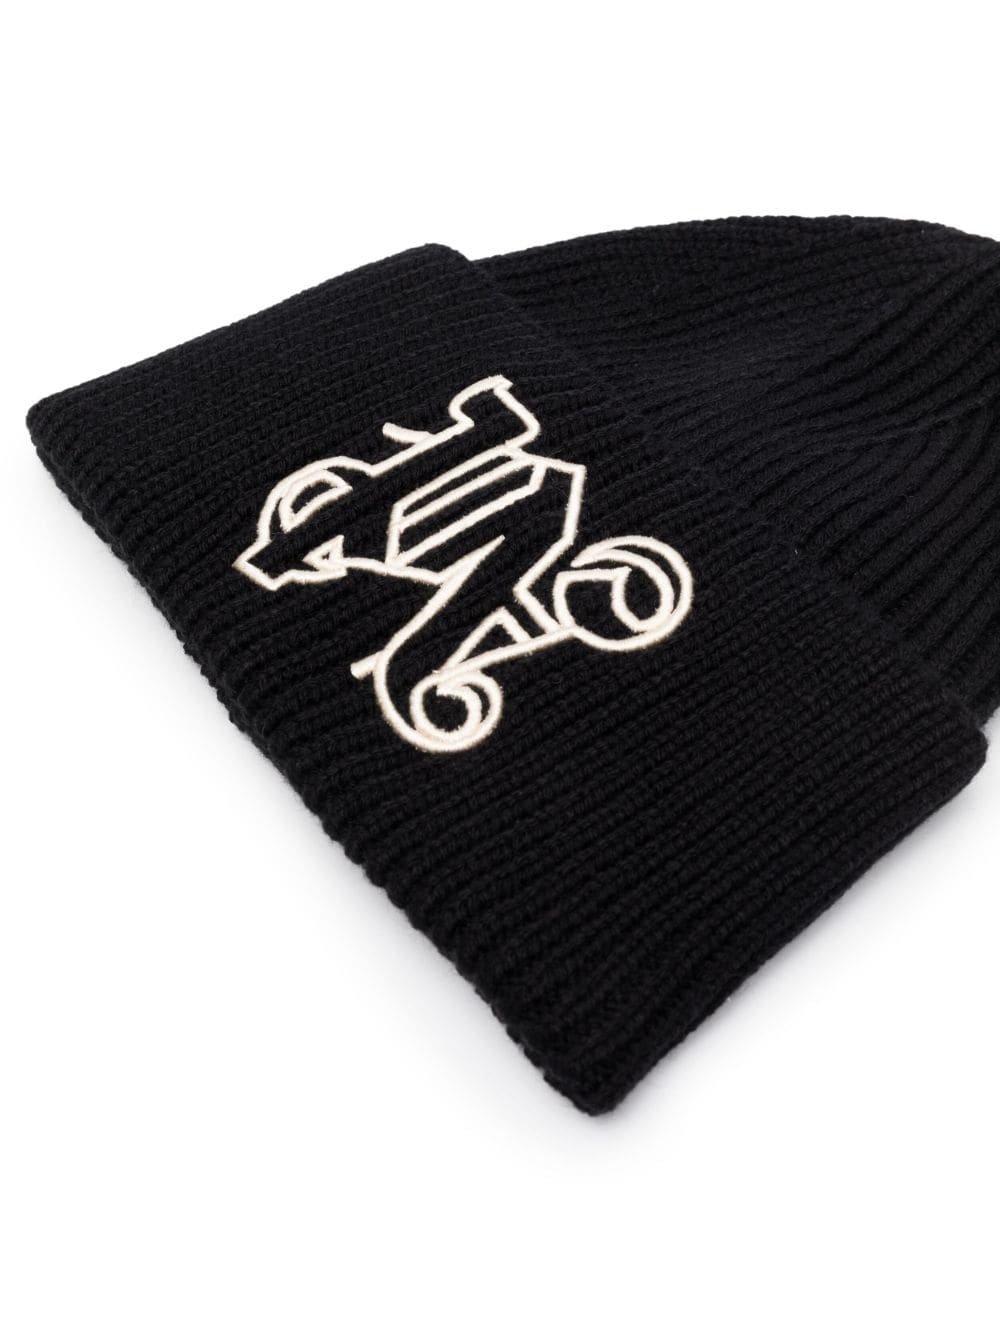 Palm Angels Embroidered Monogram Beanie in Black